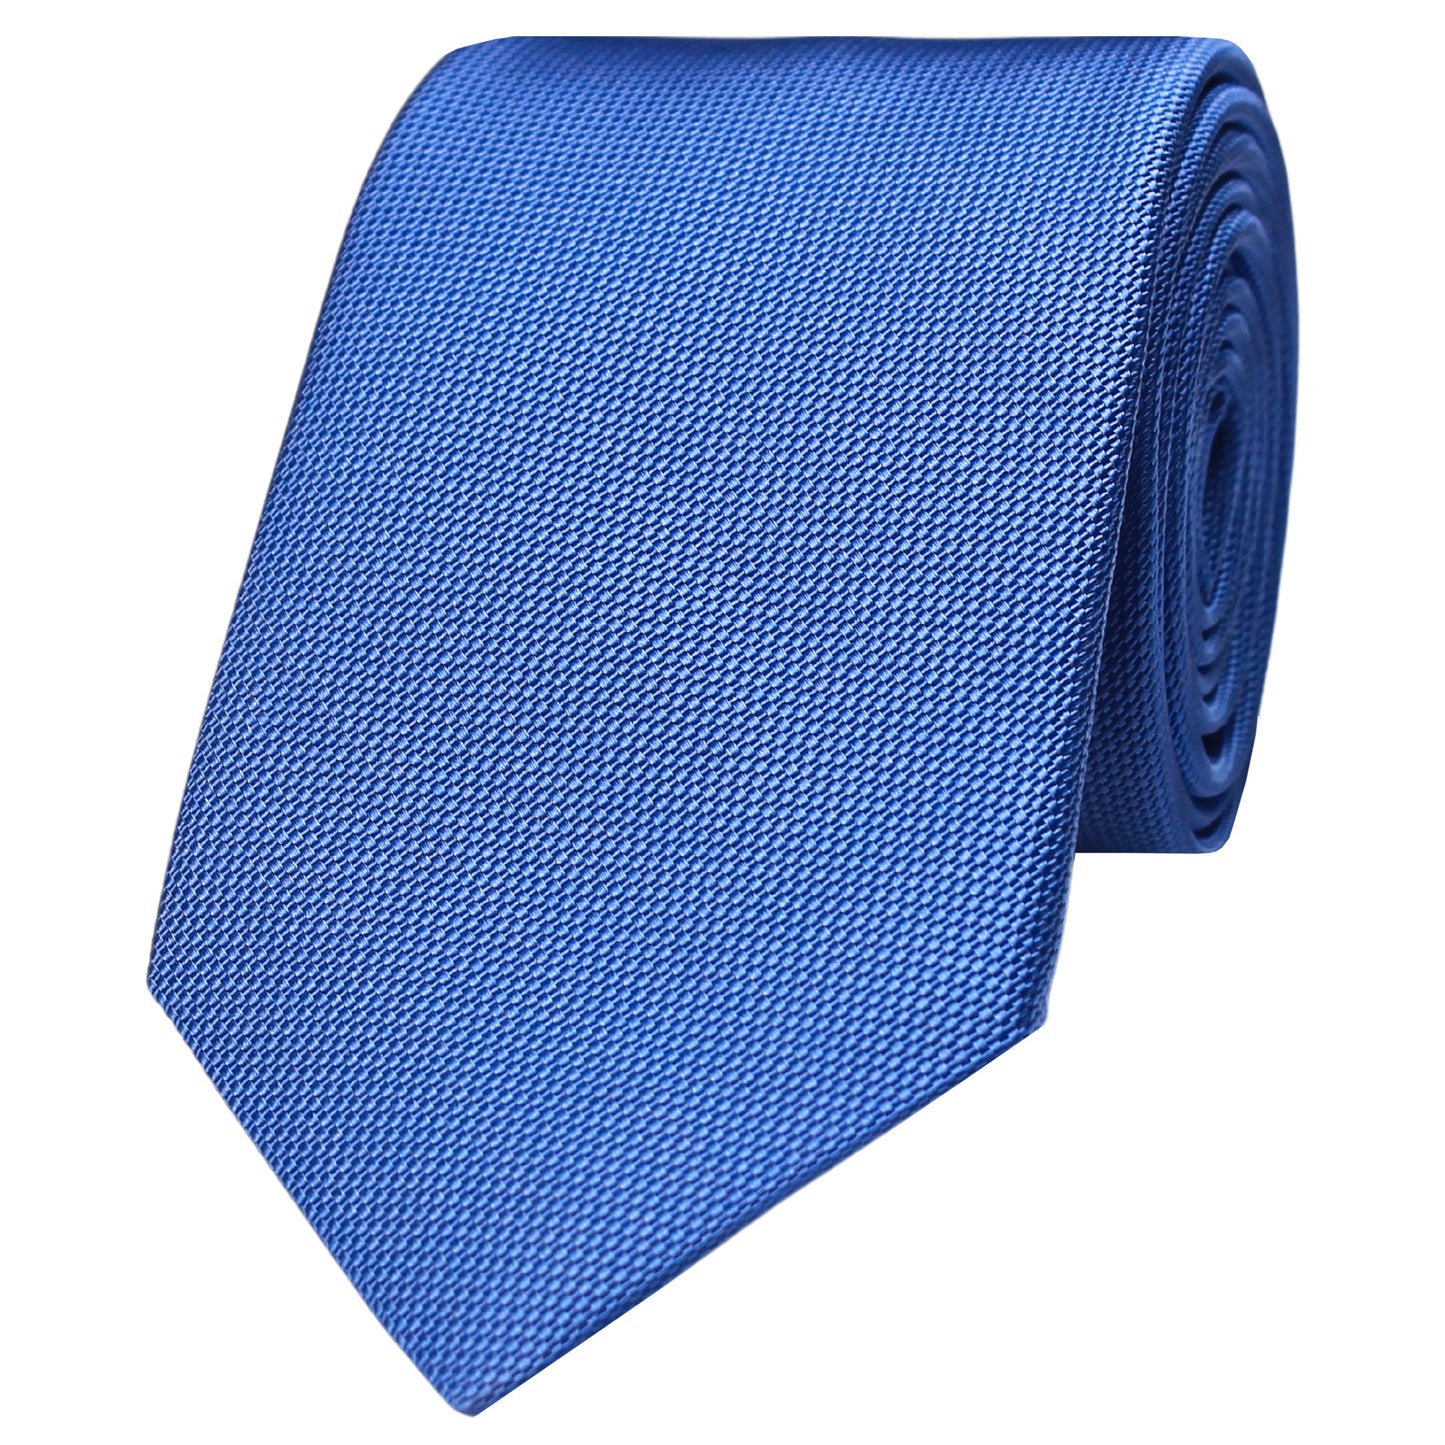 Blue Woven Textured Solid